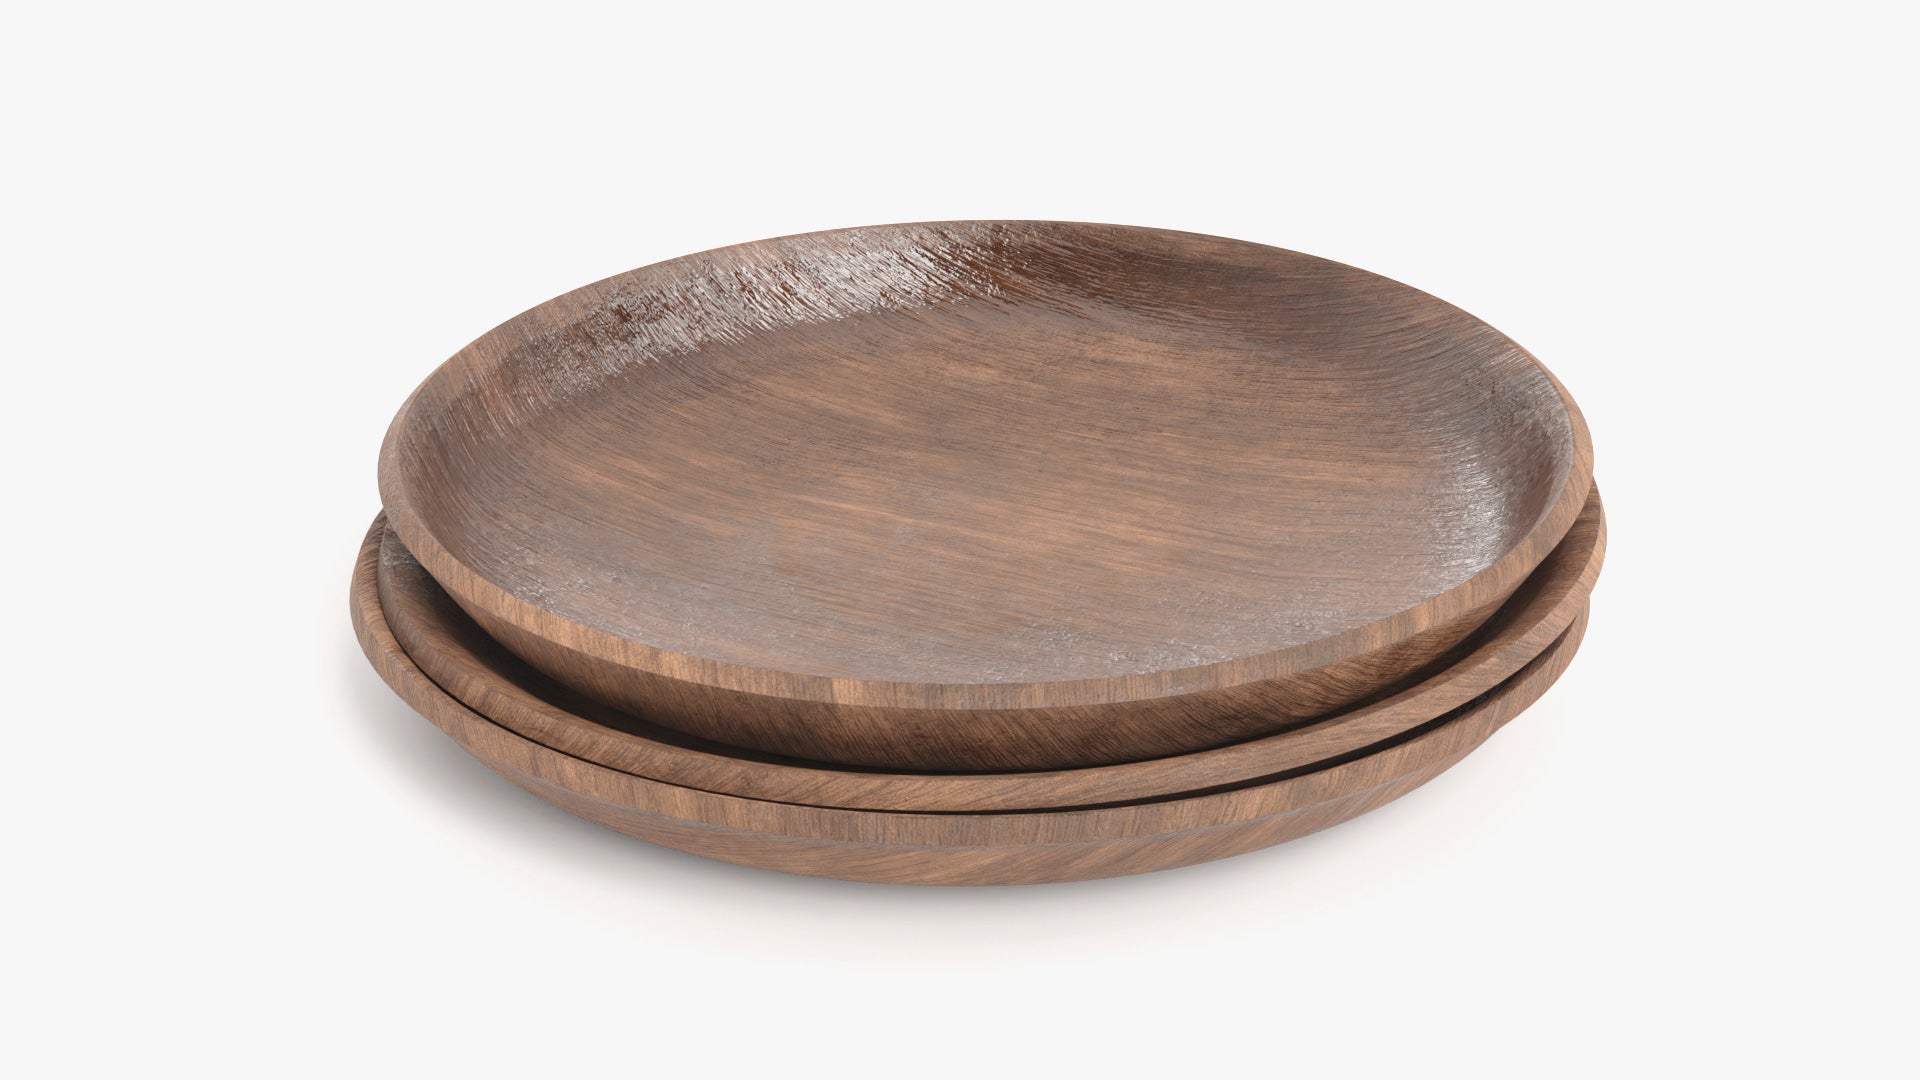 3D model of three wooden plates stacked, made of rough wood and moderately damaged by use. They have low polycount and PBR textures, and look extremely realistic